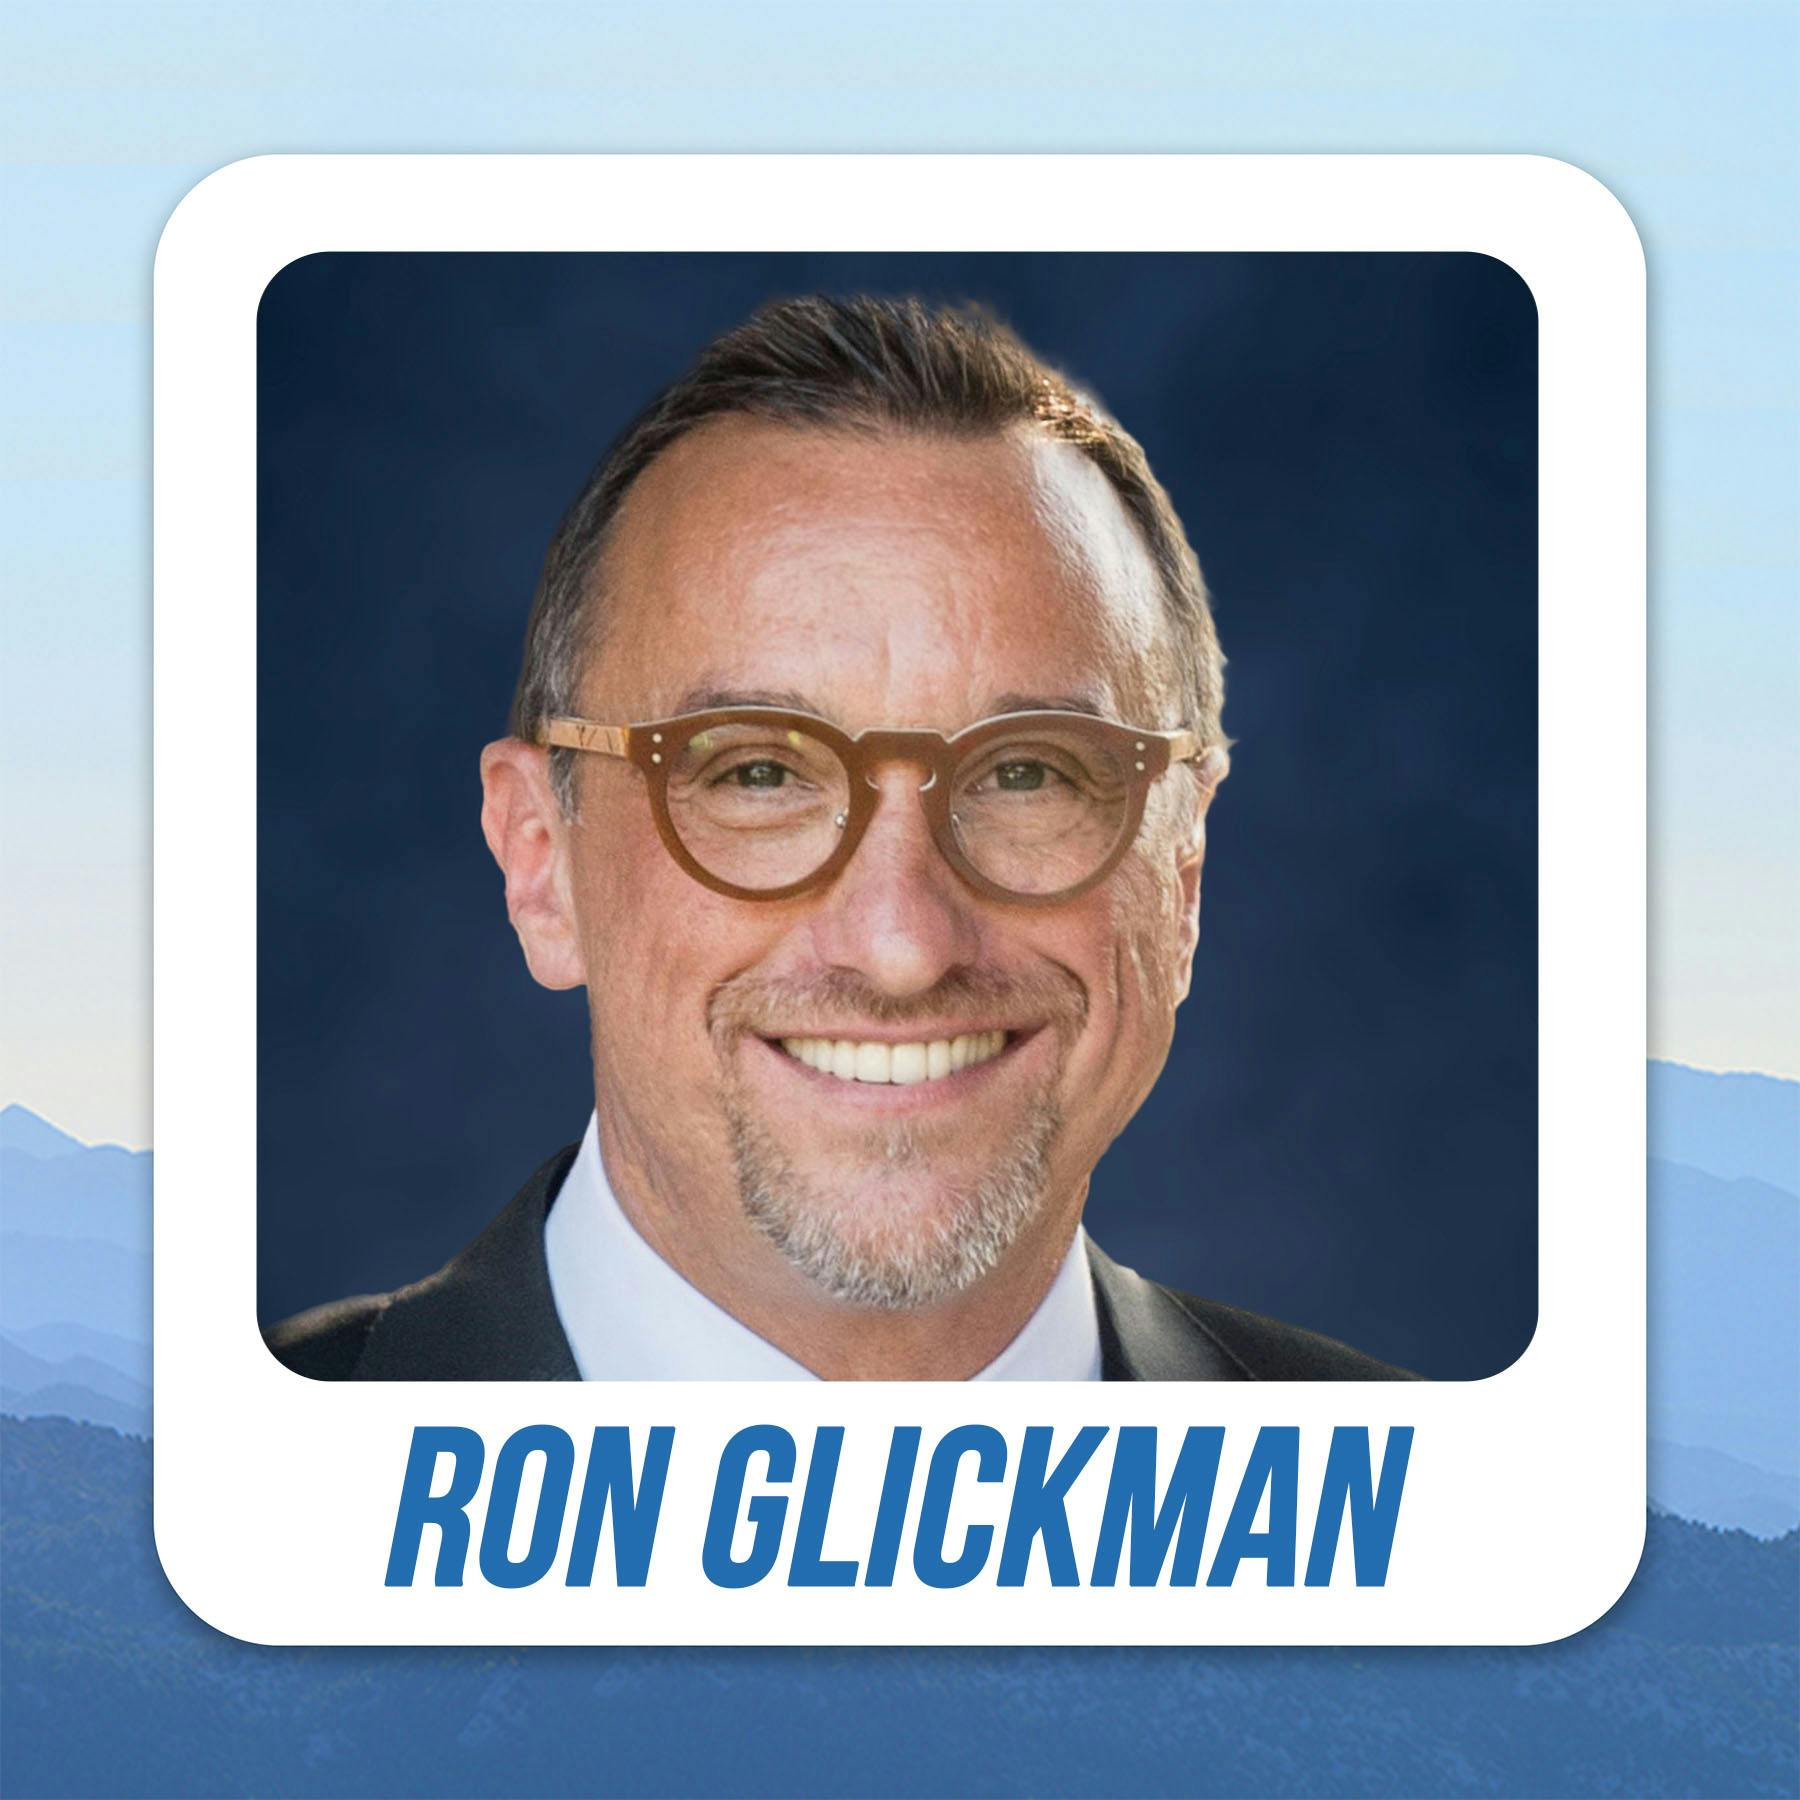 Instinctive Actions Vs Thoughtful Reactions with Ron Glickman